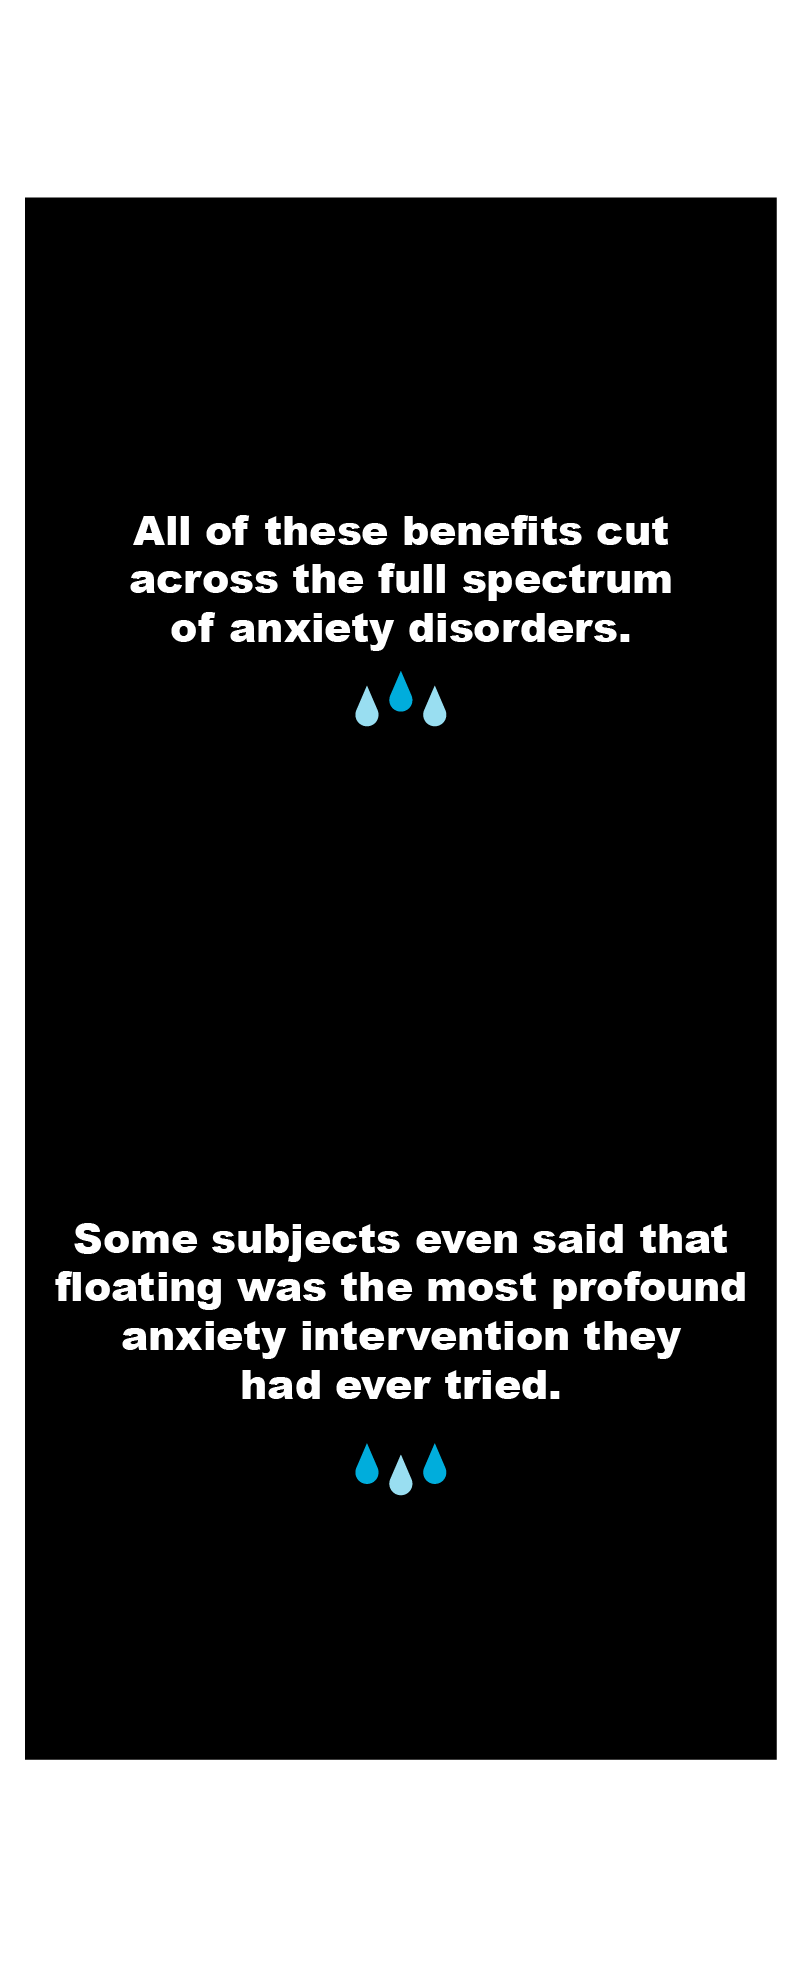 Floating was reported as the most beneficial treatment for anxiety in some subjects.